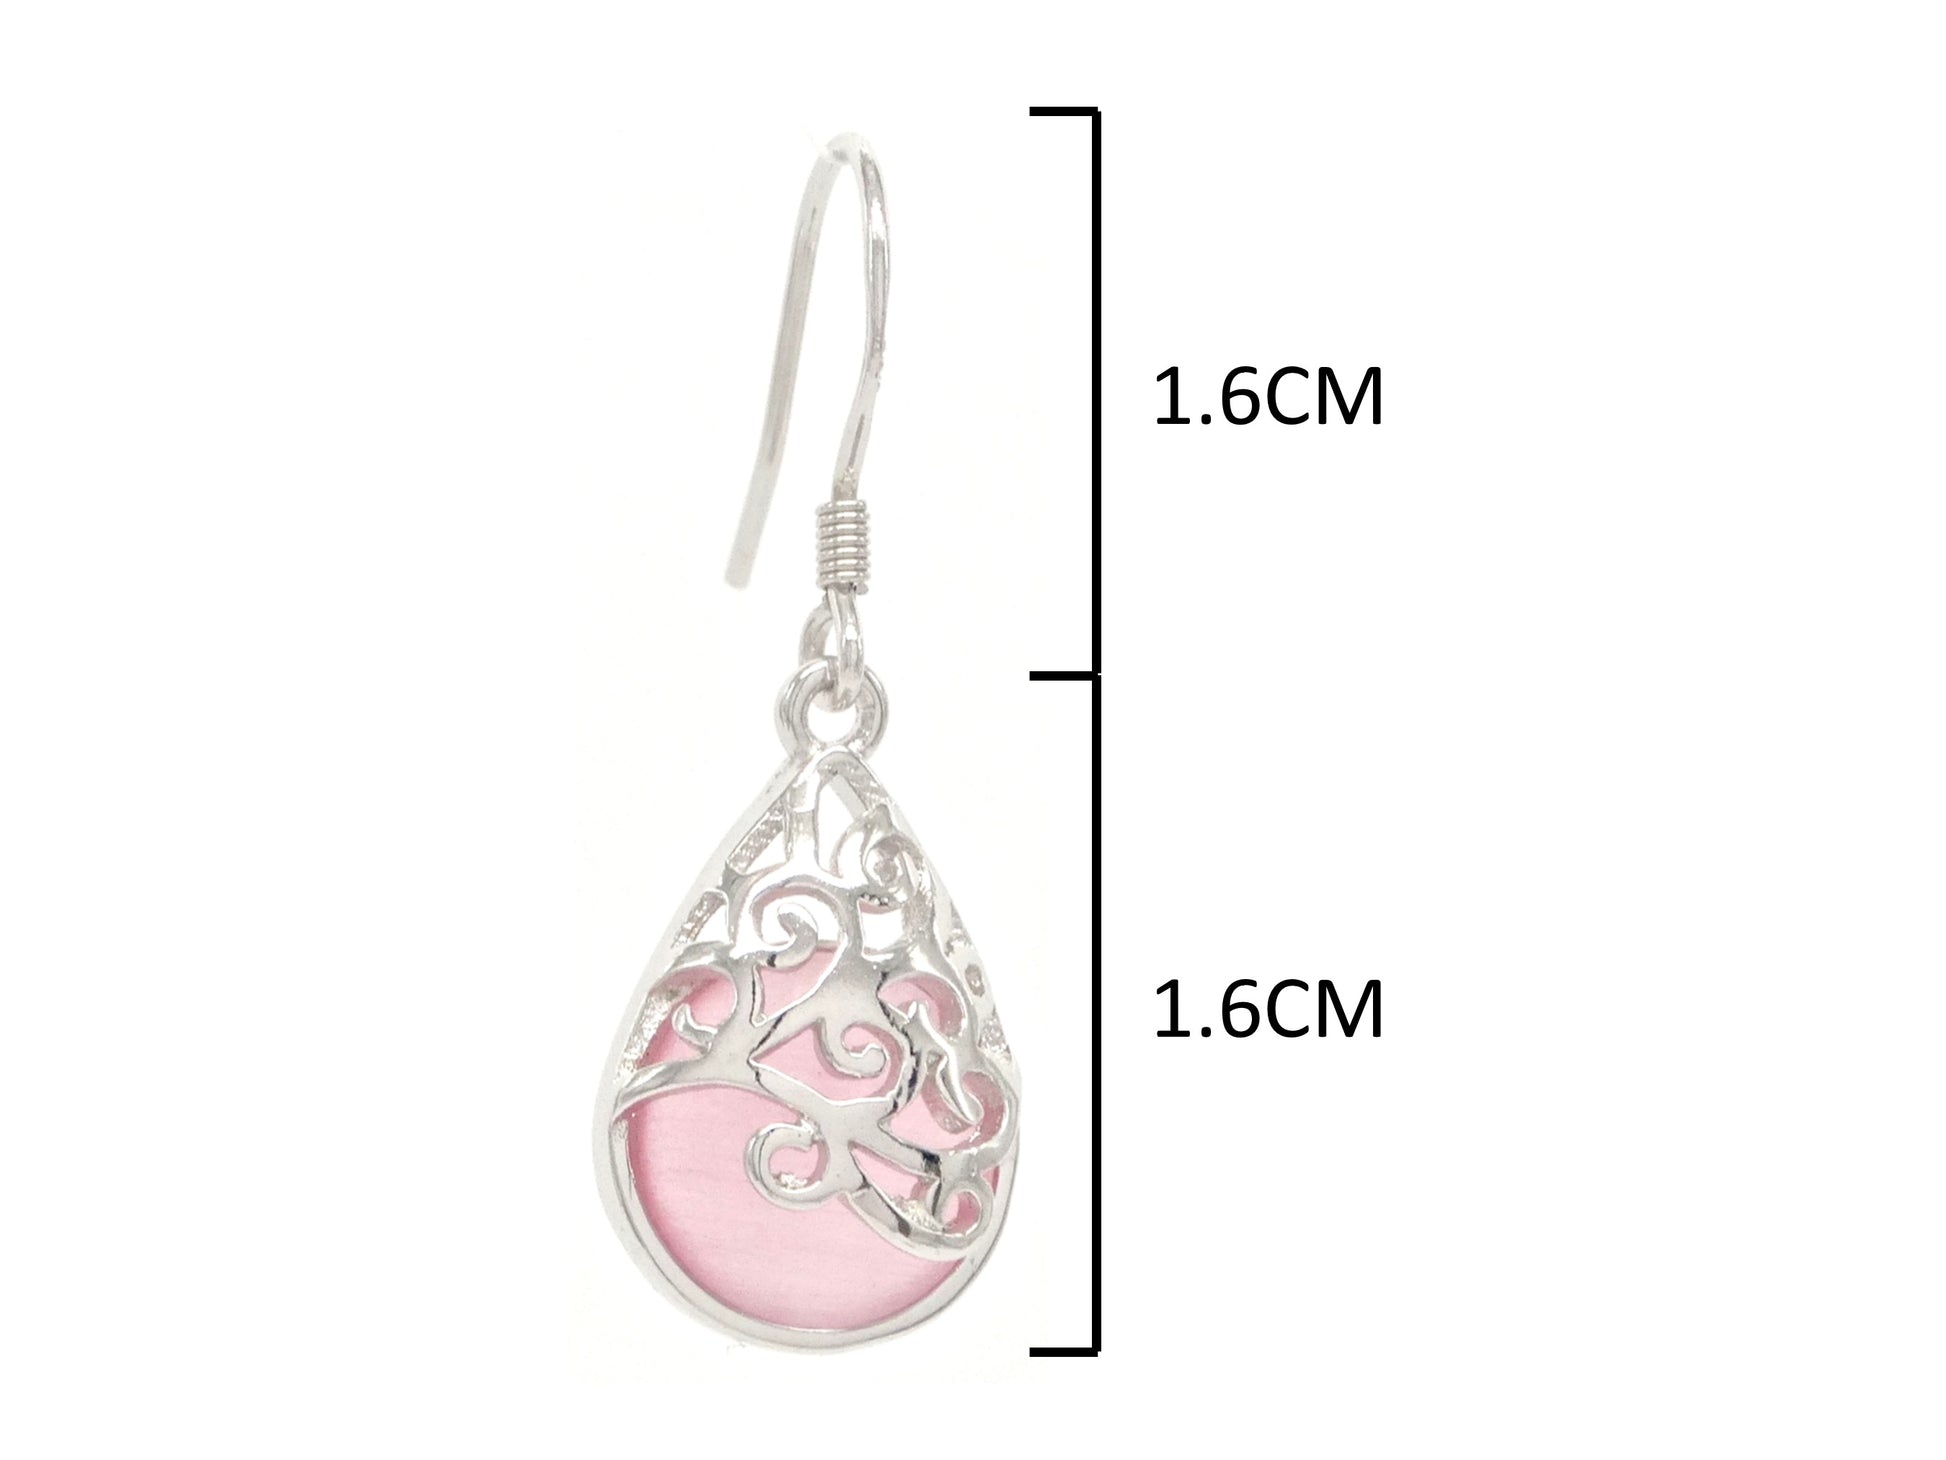 Decorated pink moonstone necklace and earrings MEASUREMENT